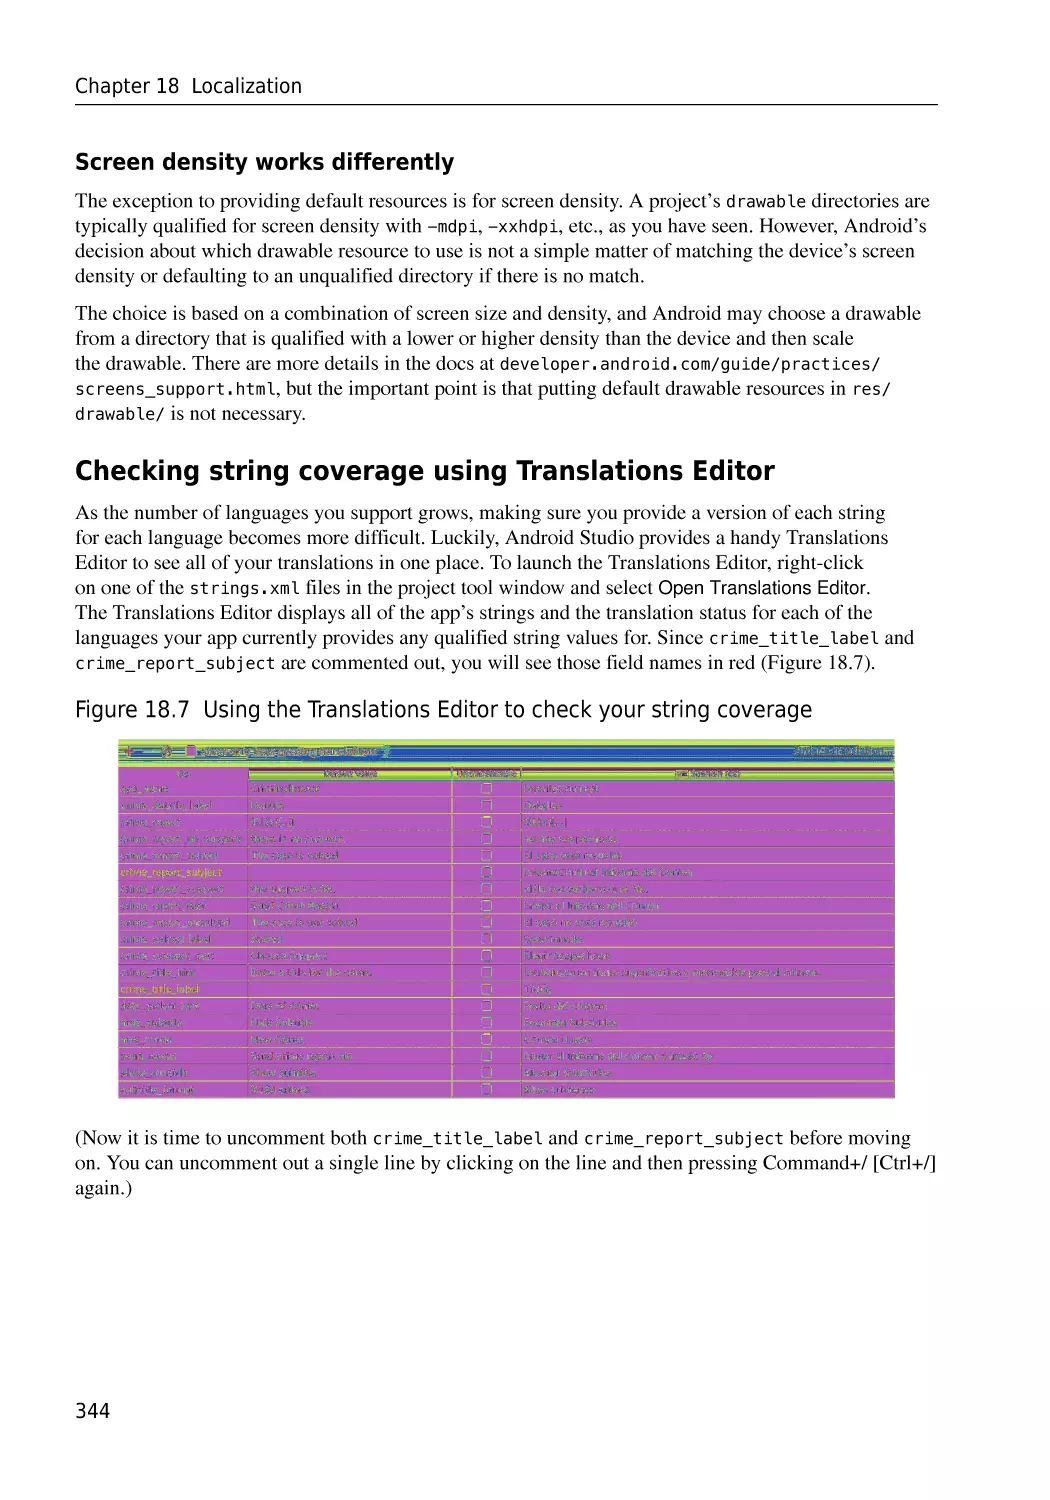 Screen density works differently
Checking string coverage using Translations Editor